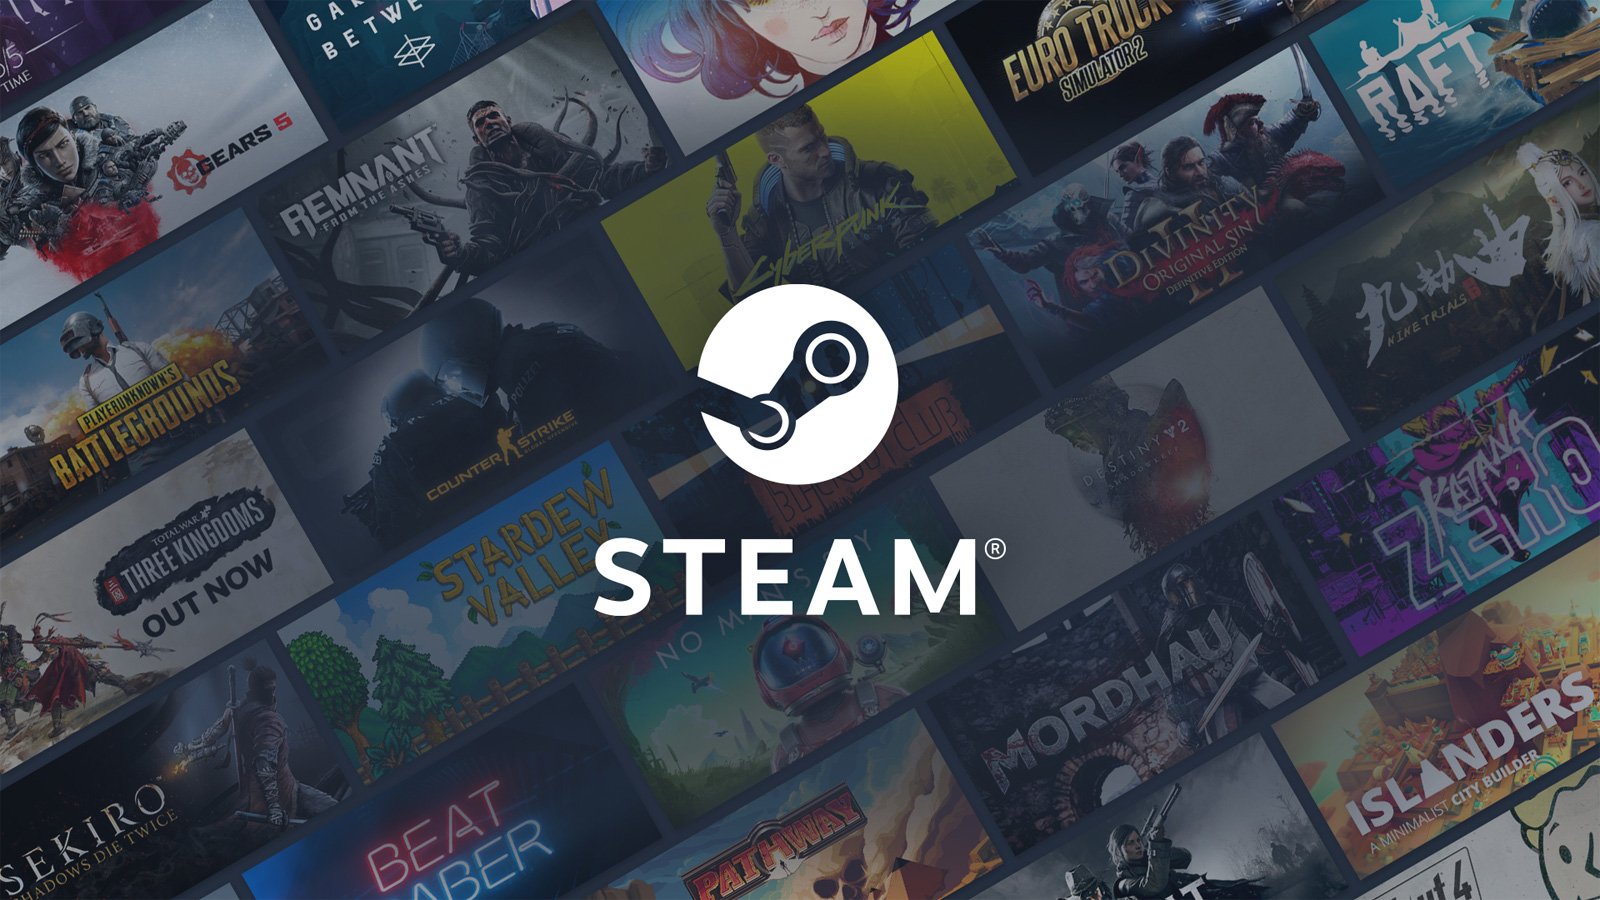 Steam game mod breached to push password-stealing malware